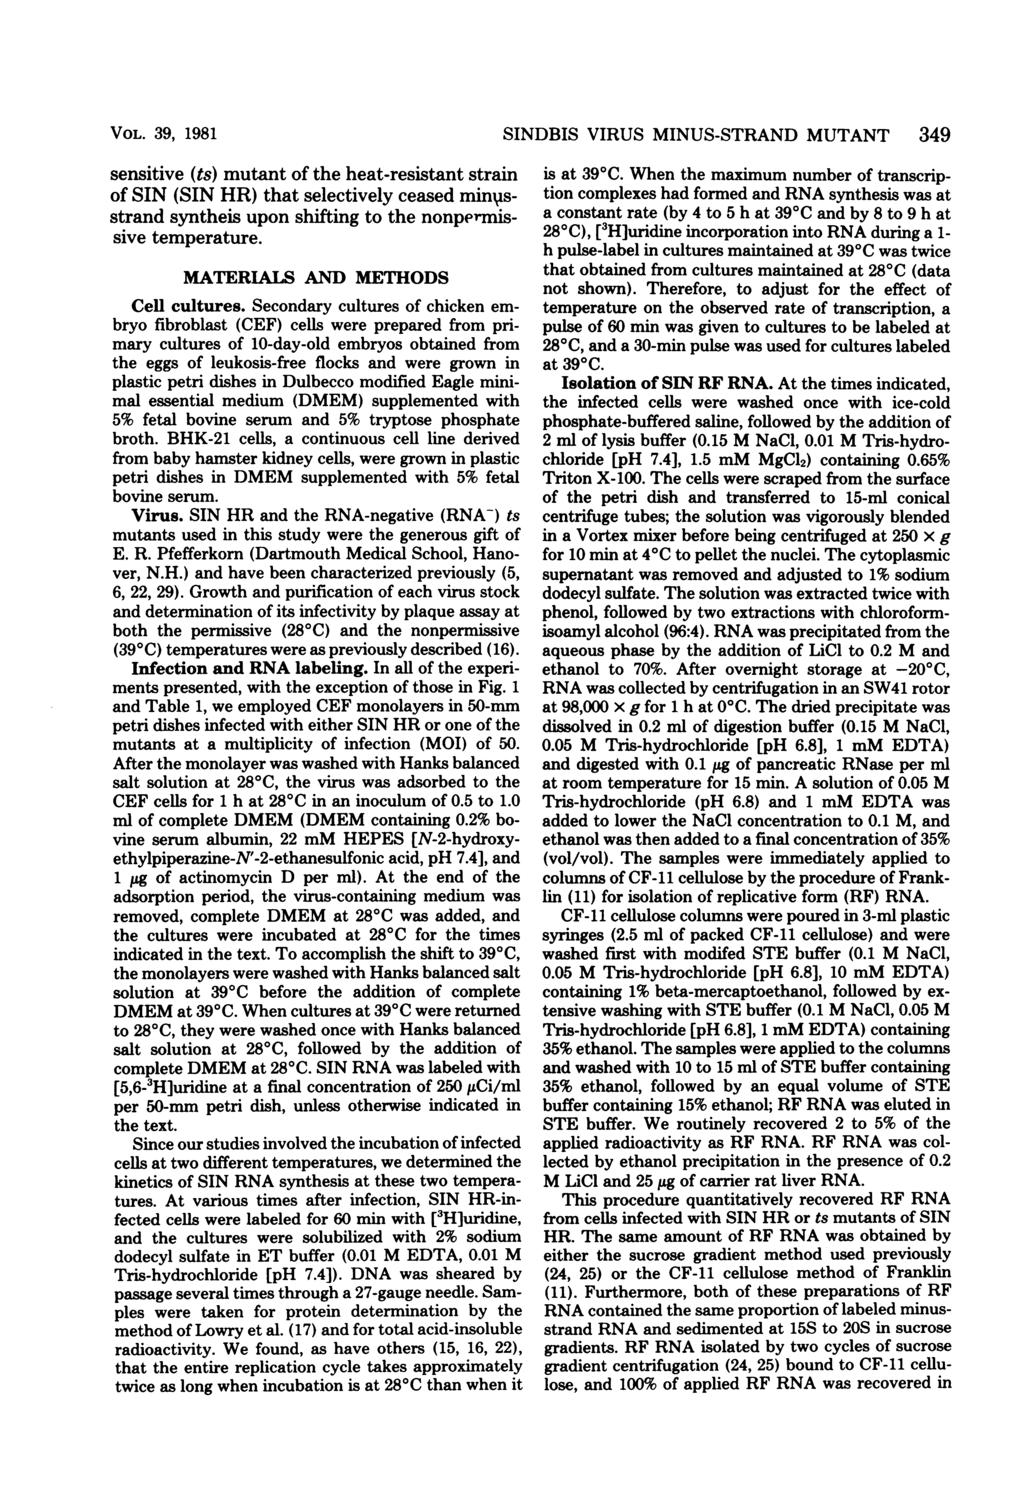 VOL. 39, 1981 sensitive (ts) mutant of the heat-resistant strain of SIN (SIN HR) that selectively ceased minvsstrand syntheis upon shifting to the nonpermissive temperature.